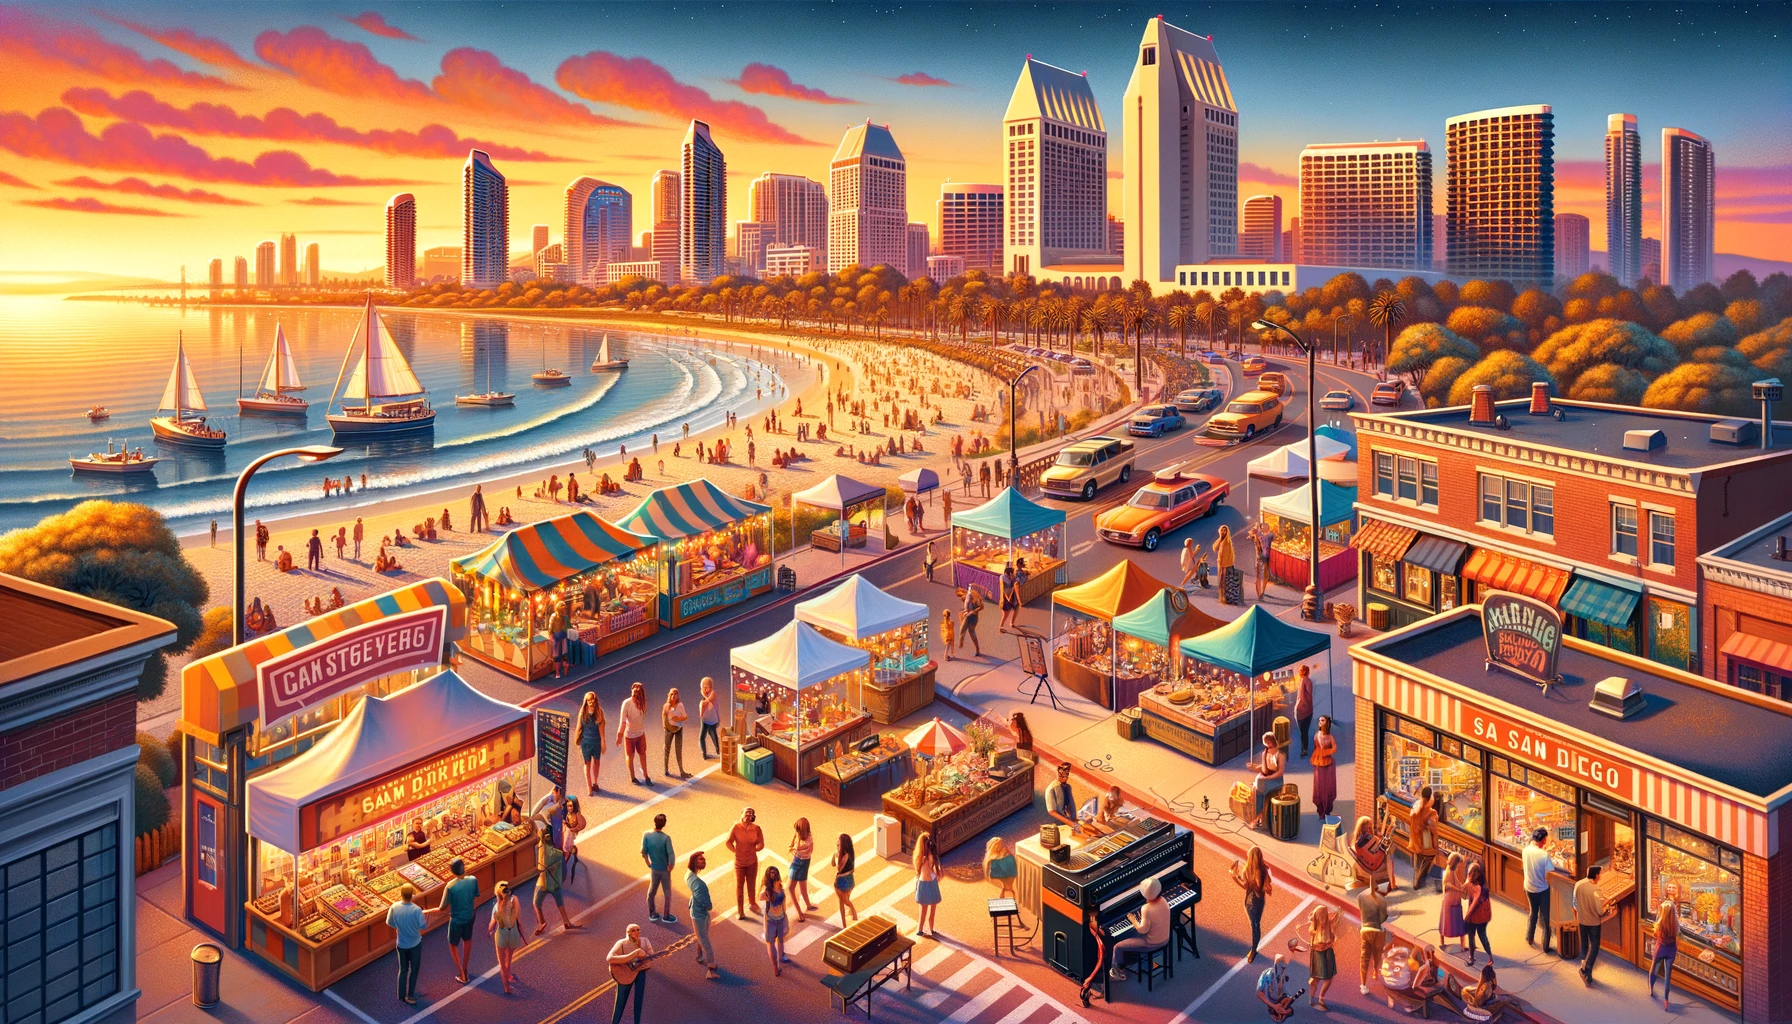 "Explore the vibrant San Diego events today with our guide. Get tips, insights, and more to make the most of the city's happenings."